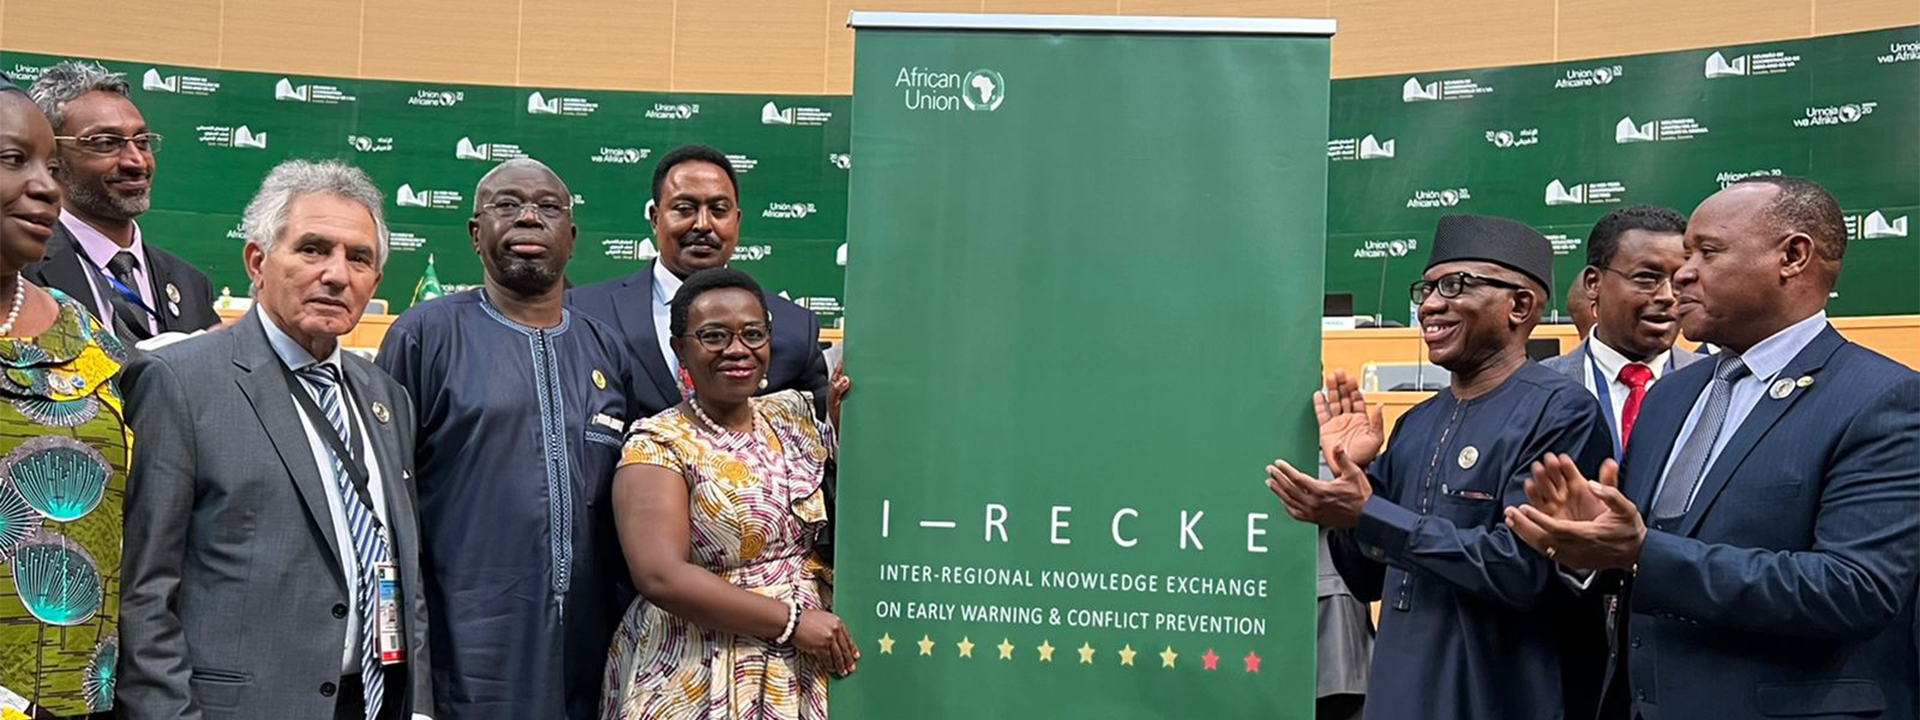 Official Statement Workneh Gebeyehu, IGAD Executive Secretary Pre Launch of the Inter-Regional Knowledge Exchange on Early Warning and Conflict Prevention (I-Recke) Lusaka, Zambia Saturday, 16th July 2022